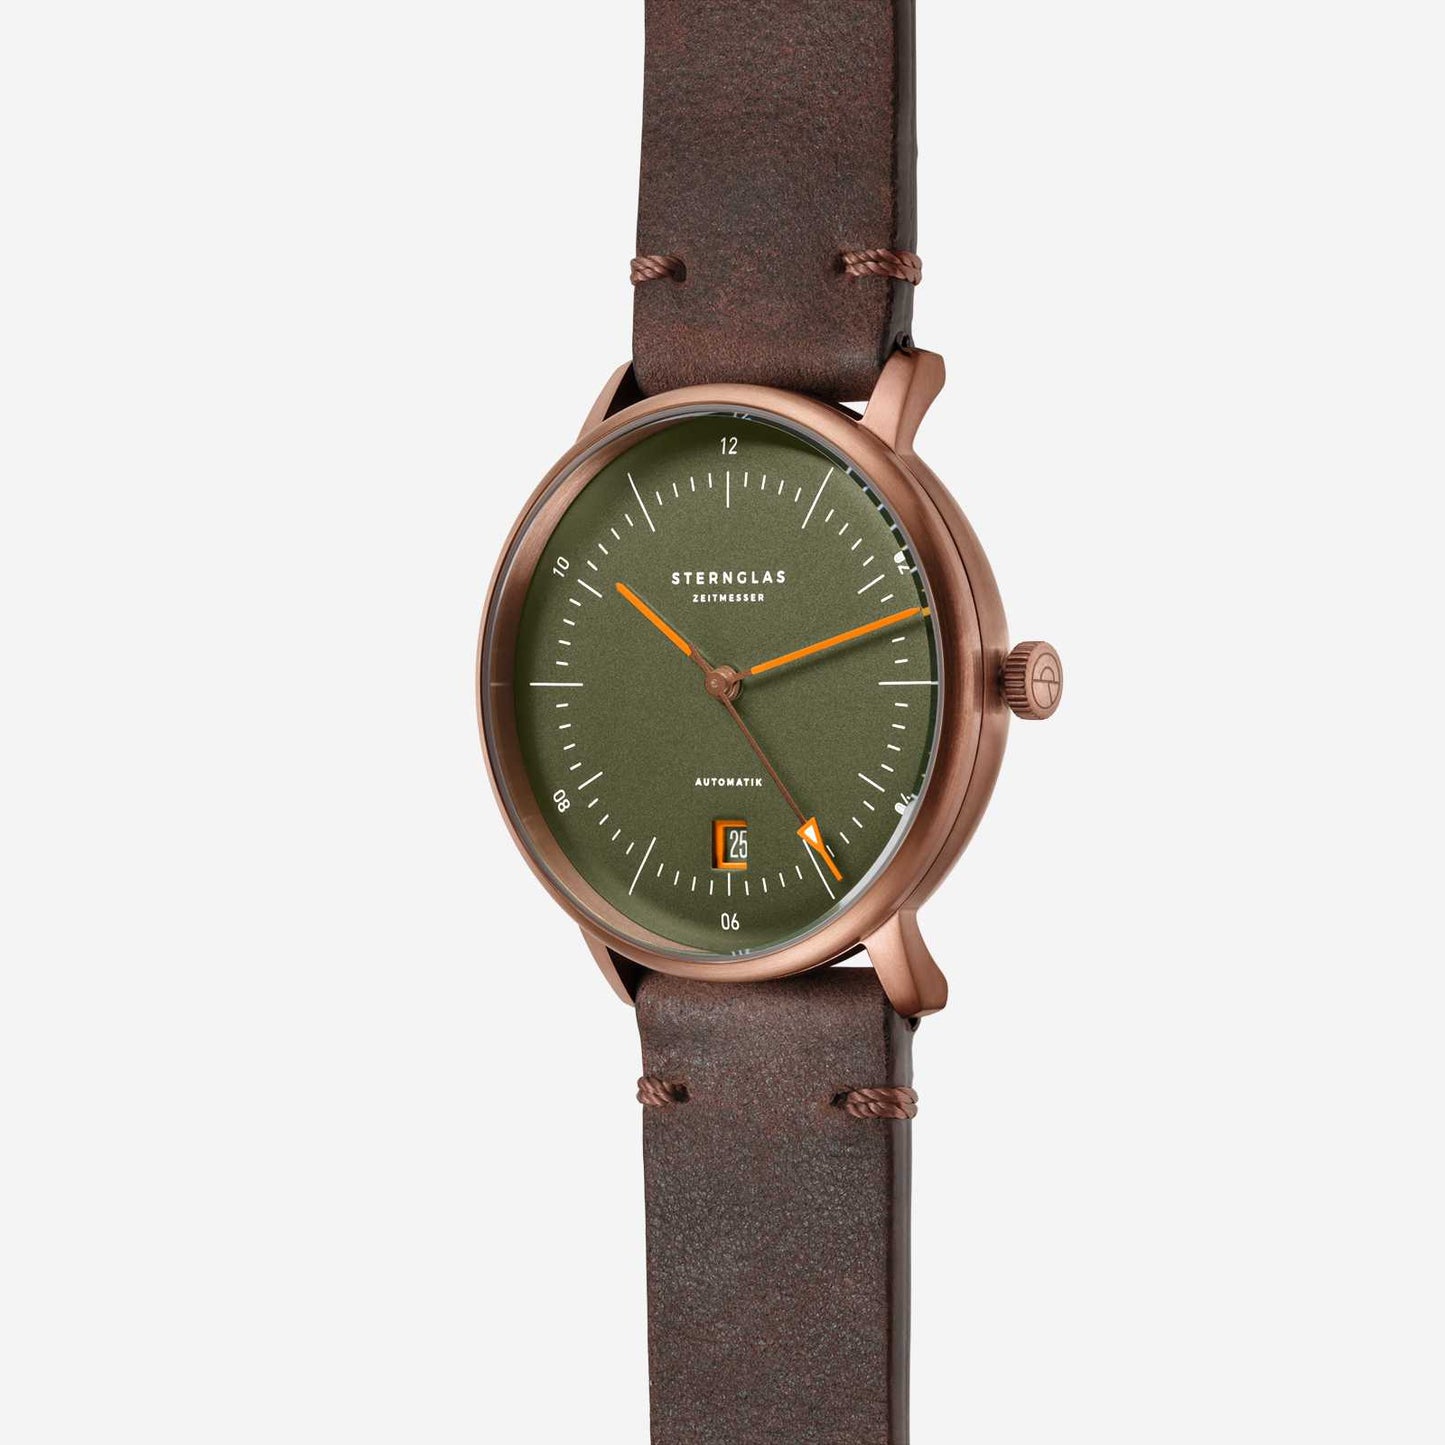 popup|Domed dial|The reed green satin-finished dial with fine curvature gives the model an elegant vintage character.